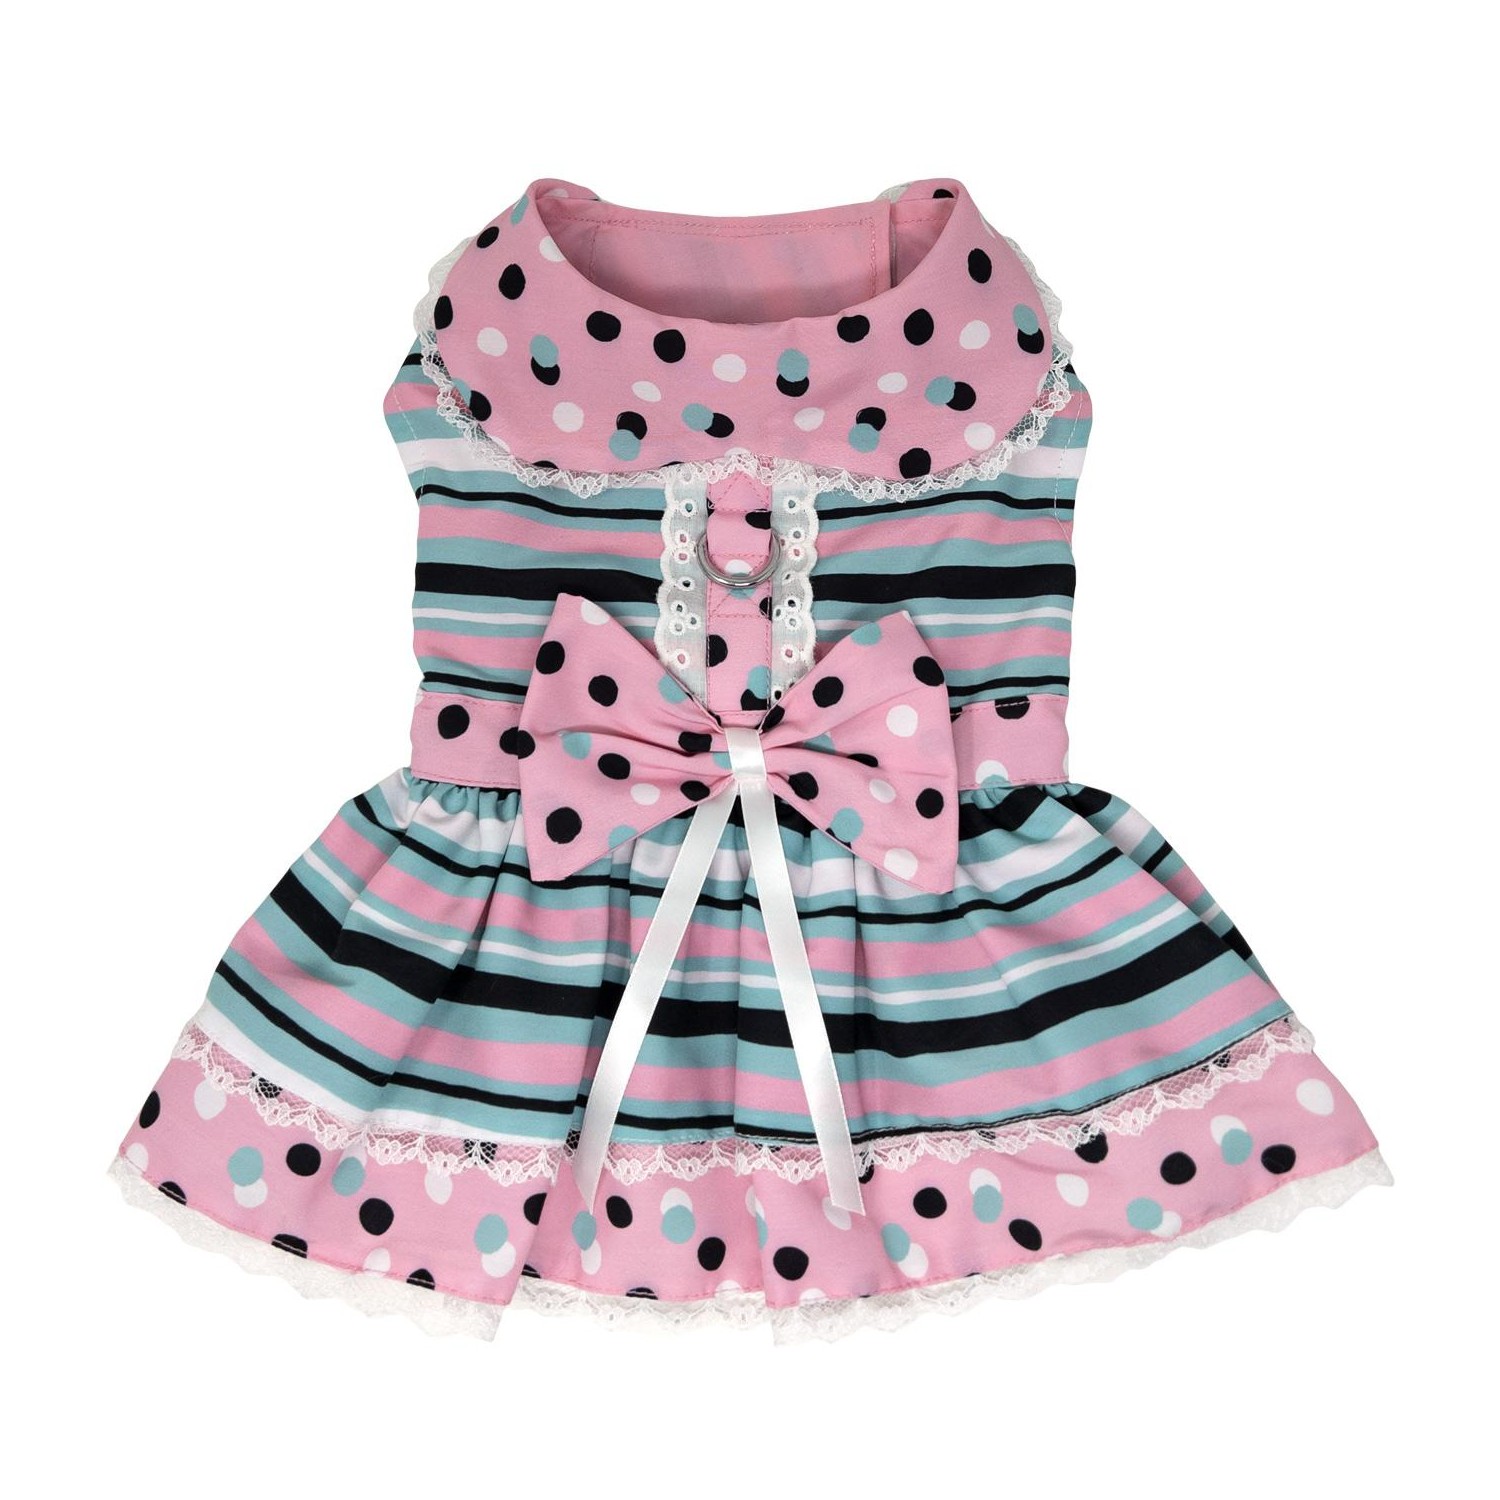 Dots and Stripes Dog Harness Dress with Matching Leash by Doggie Design - Pink & Teal